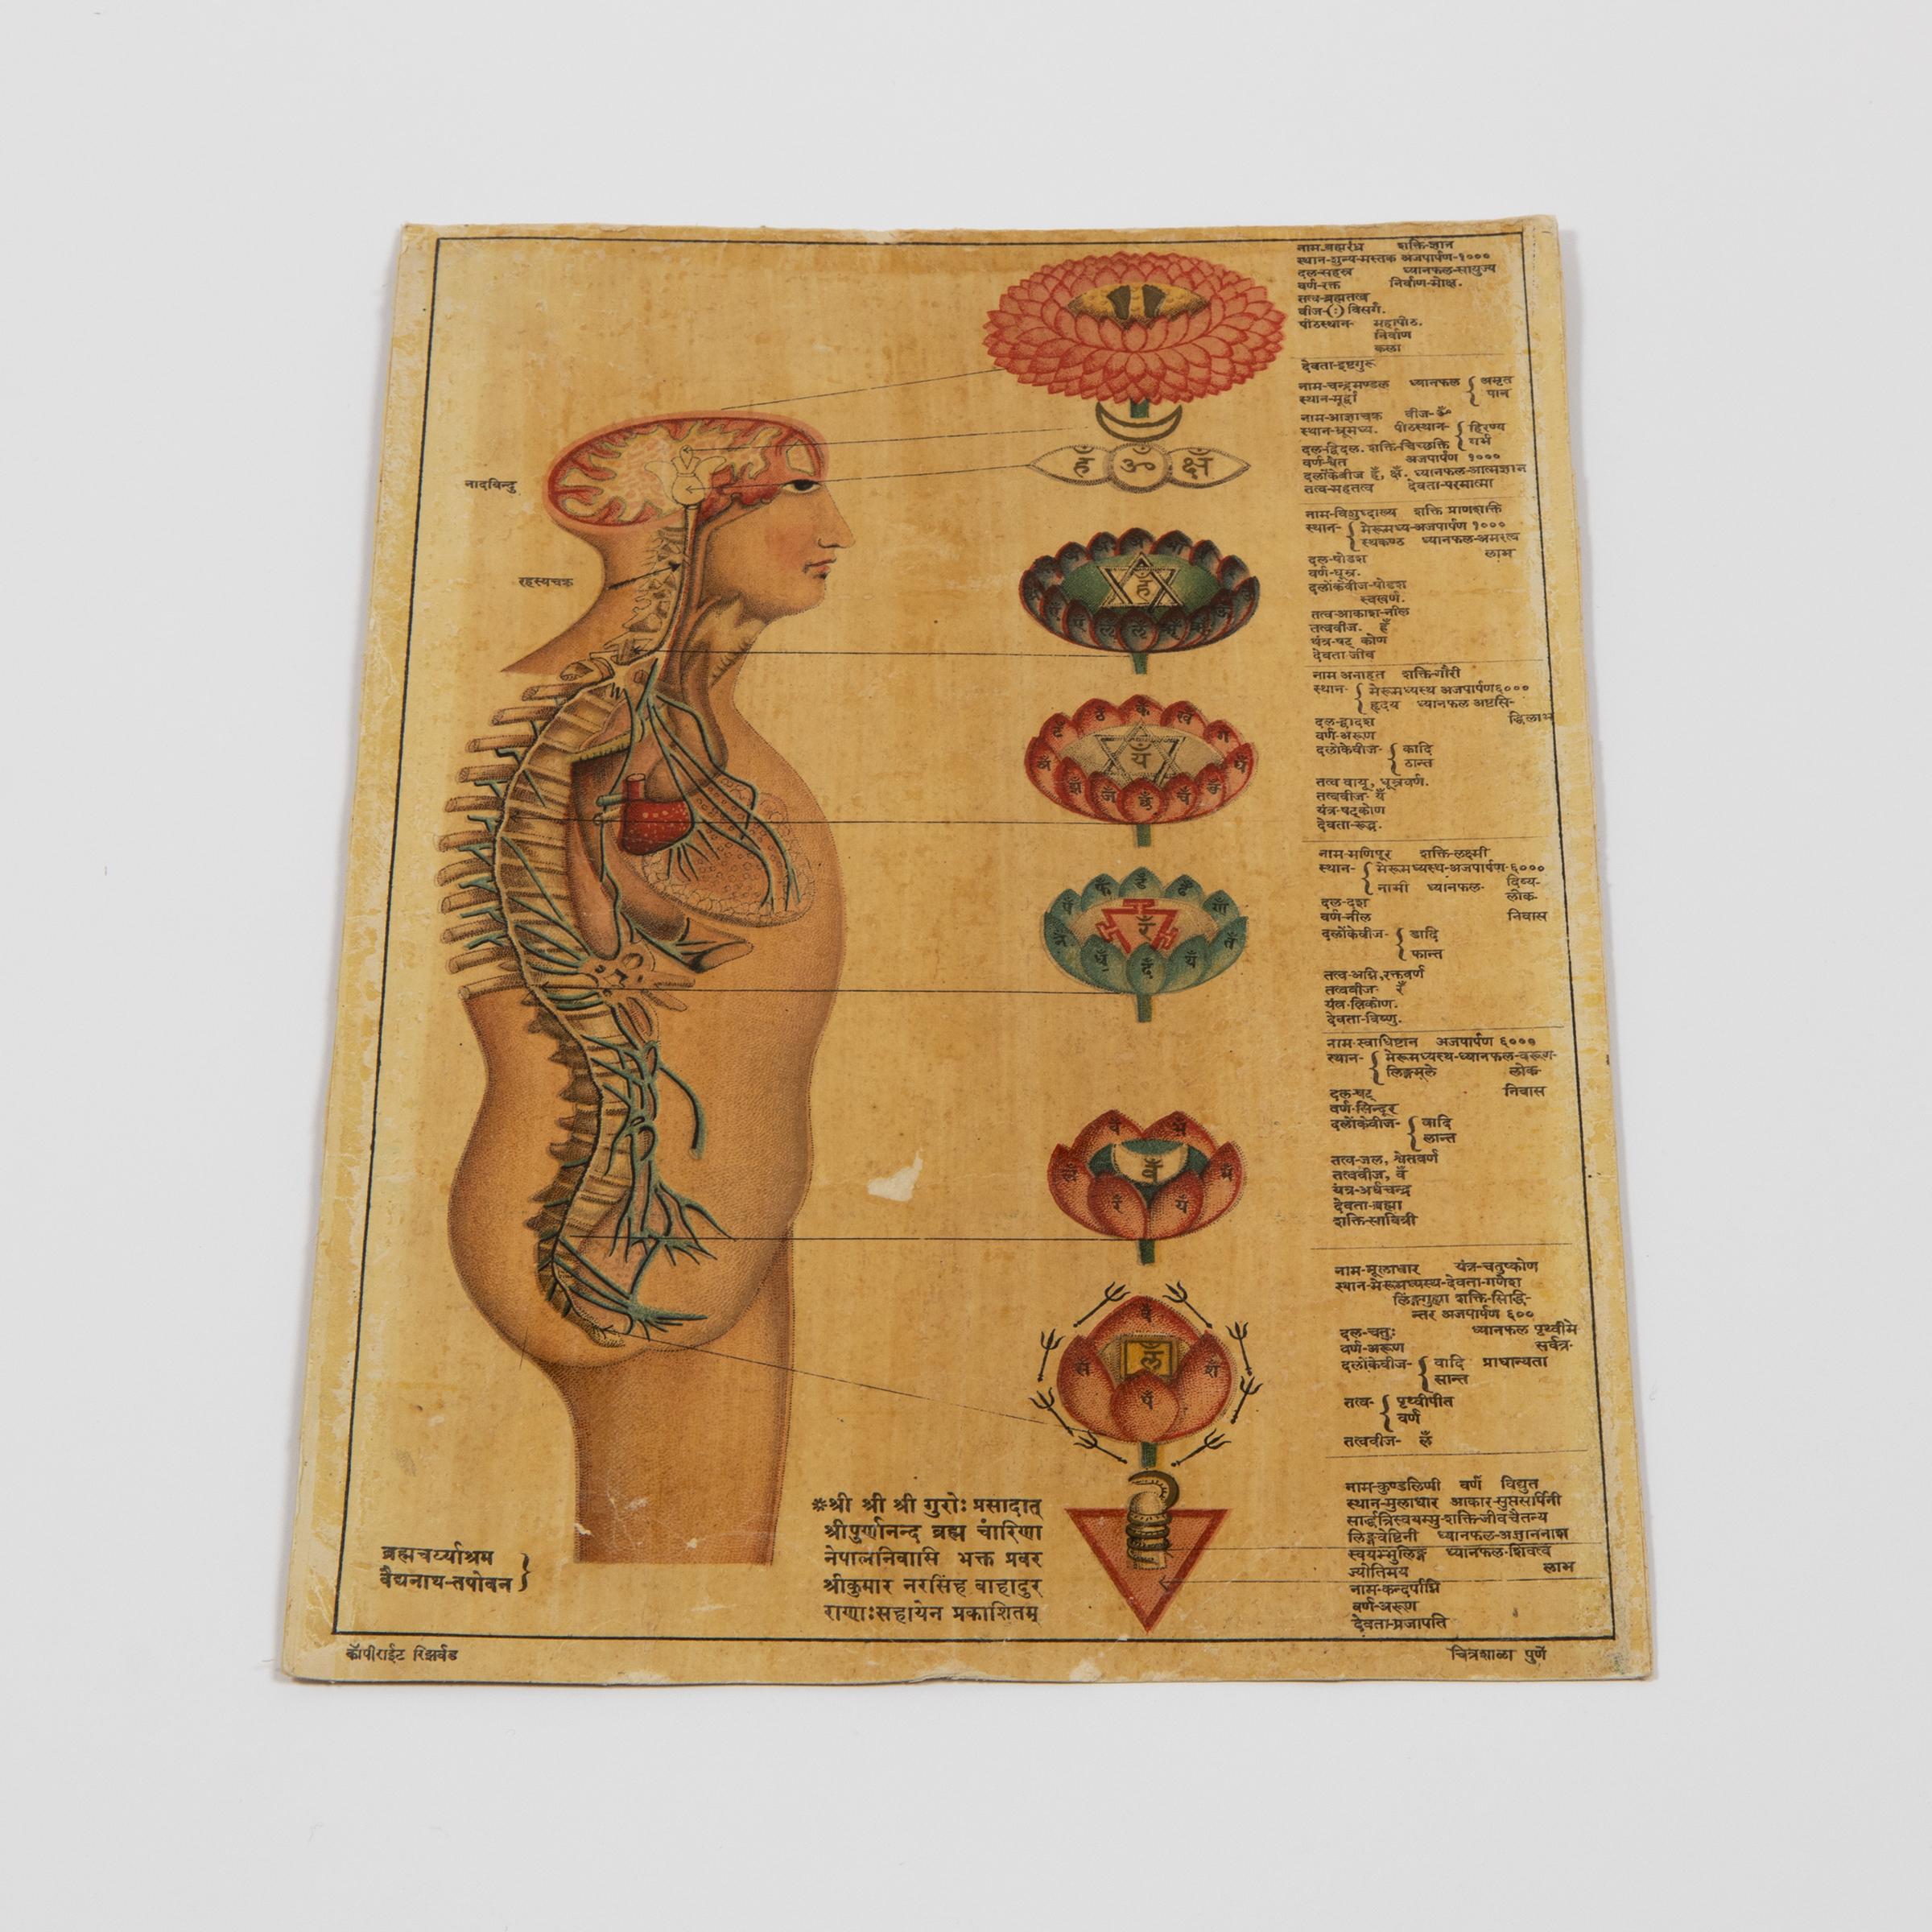 Set of two antique Hindu / Indian anatomical prints, emphasizing the seven chakras with Sanskrit text.

Original handmade prints on antique paper.